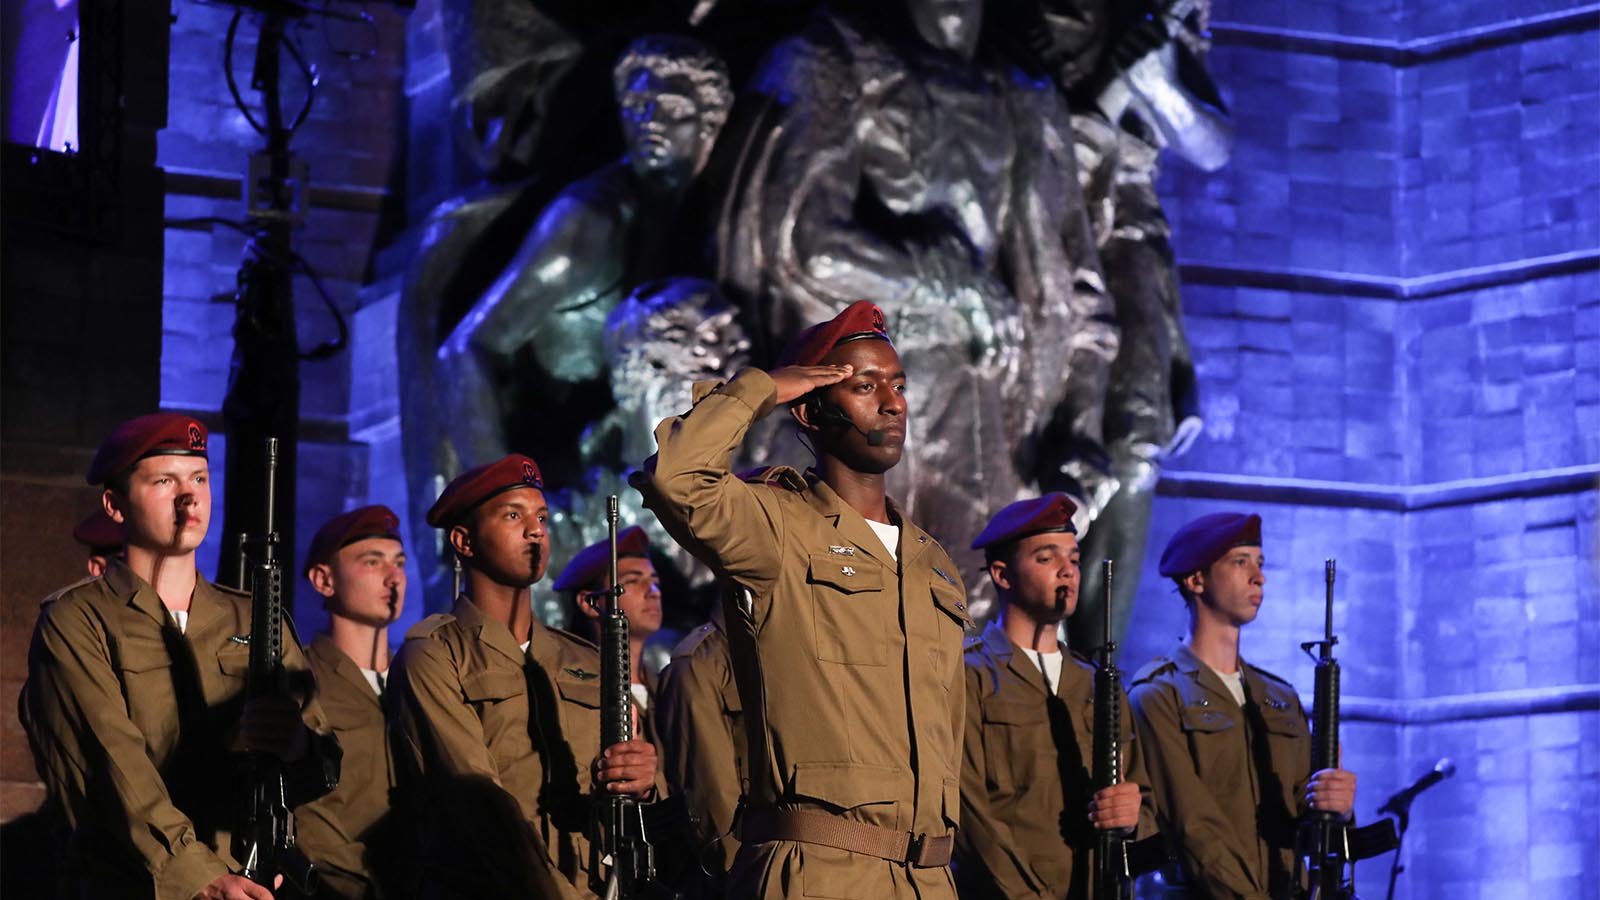 Israeli soldiers stand below a monument at a ceremony held at the Yad Vashem Holocaust Memorial Museum in Jerusalem, as Israel marks annual Holocaust Remembrance Day. May 1, 2019. Photo by Noam Rivkin Fenton/Flash90